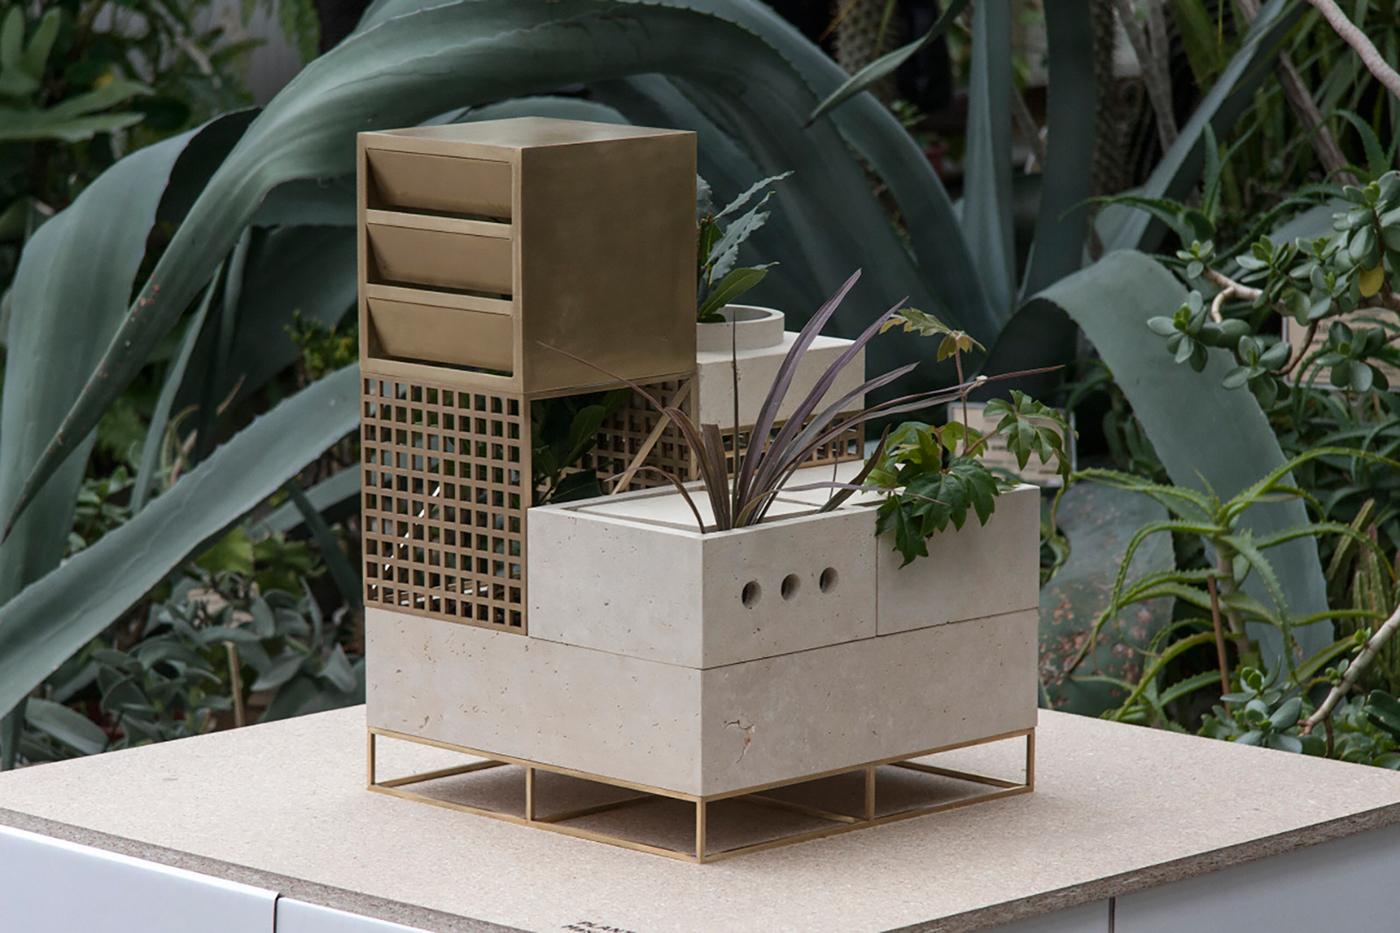 With Plantscape, creative studio Supaform explores the way plants not only survive but also thrive in a hostile environment. In a subtle reference to a post-apocalyptic scenario, this modular installation looks like an architectural structure taken